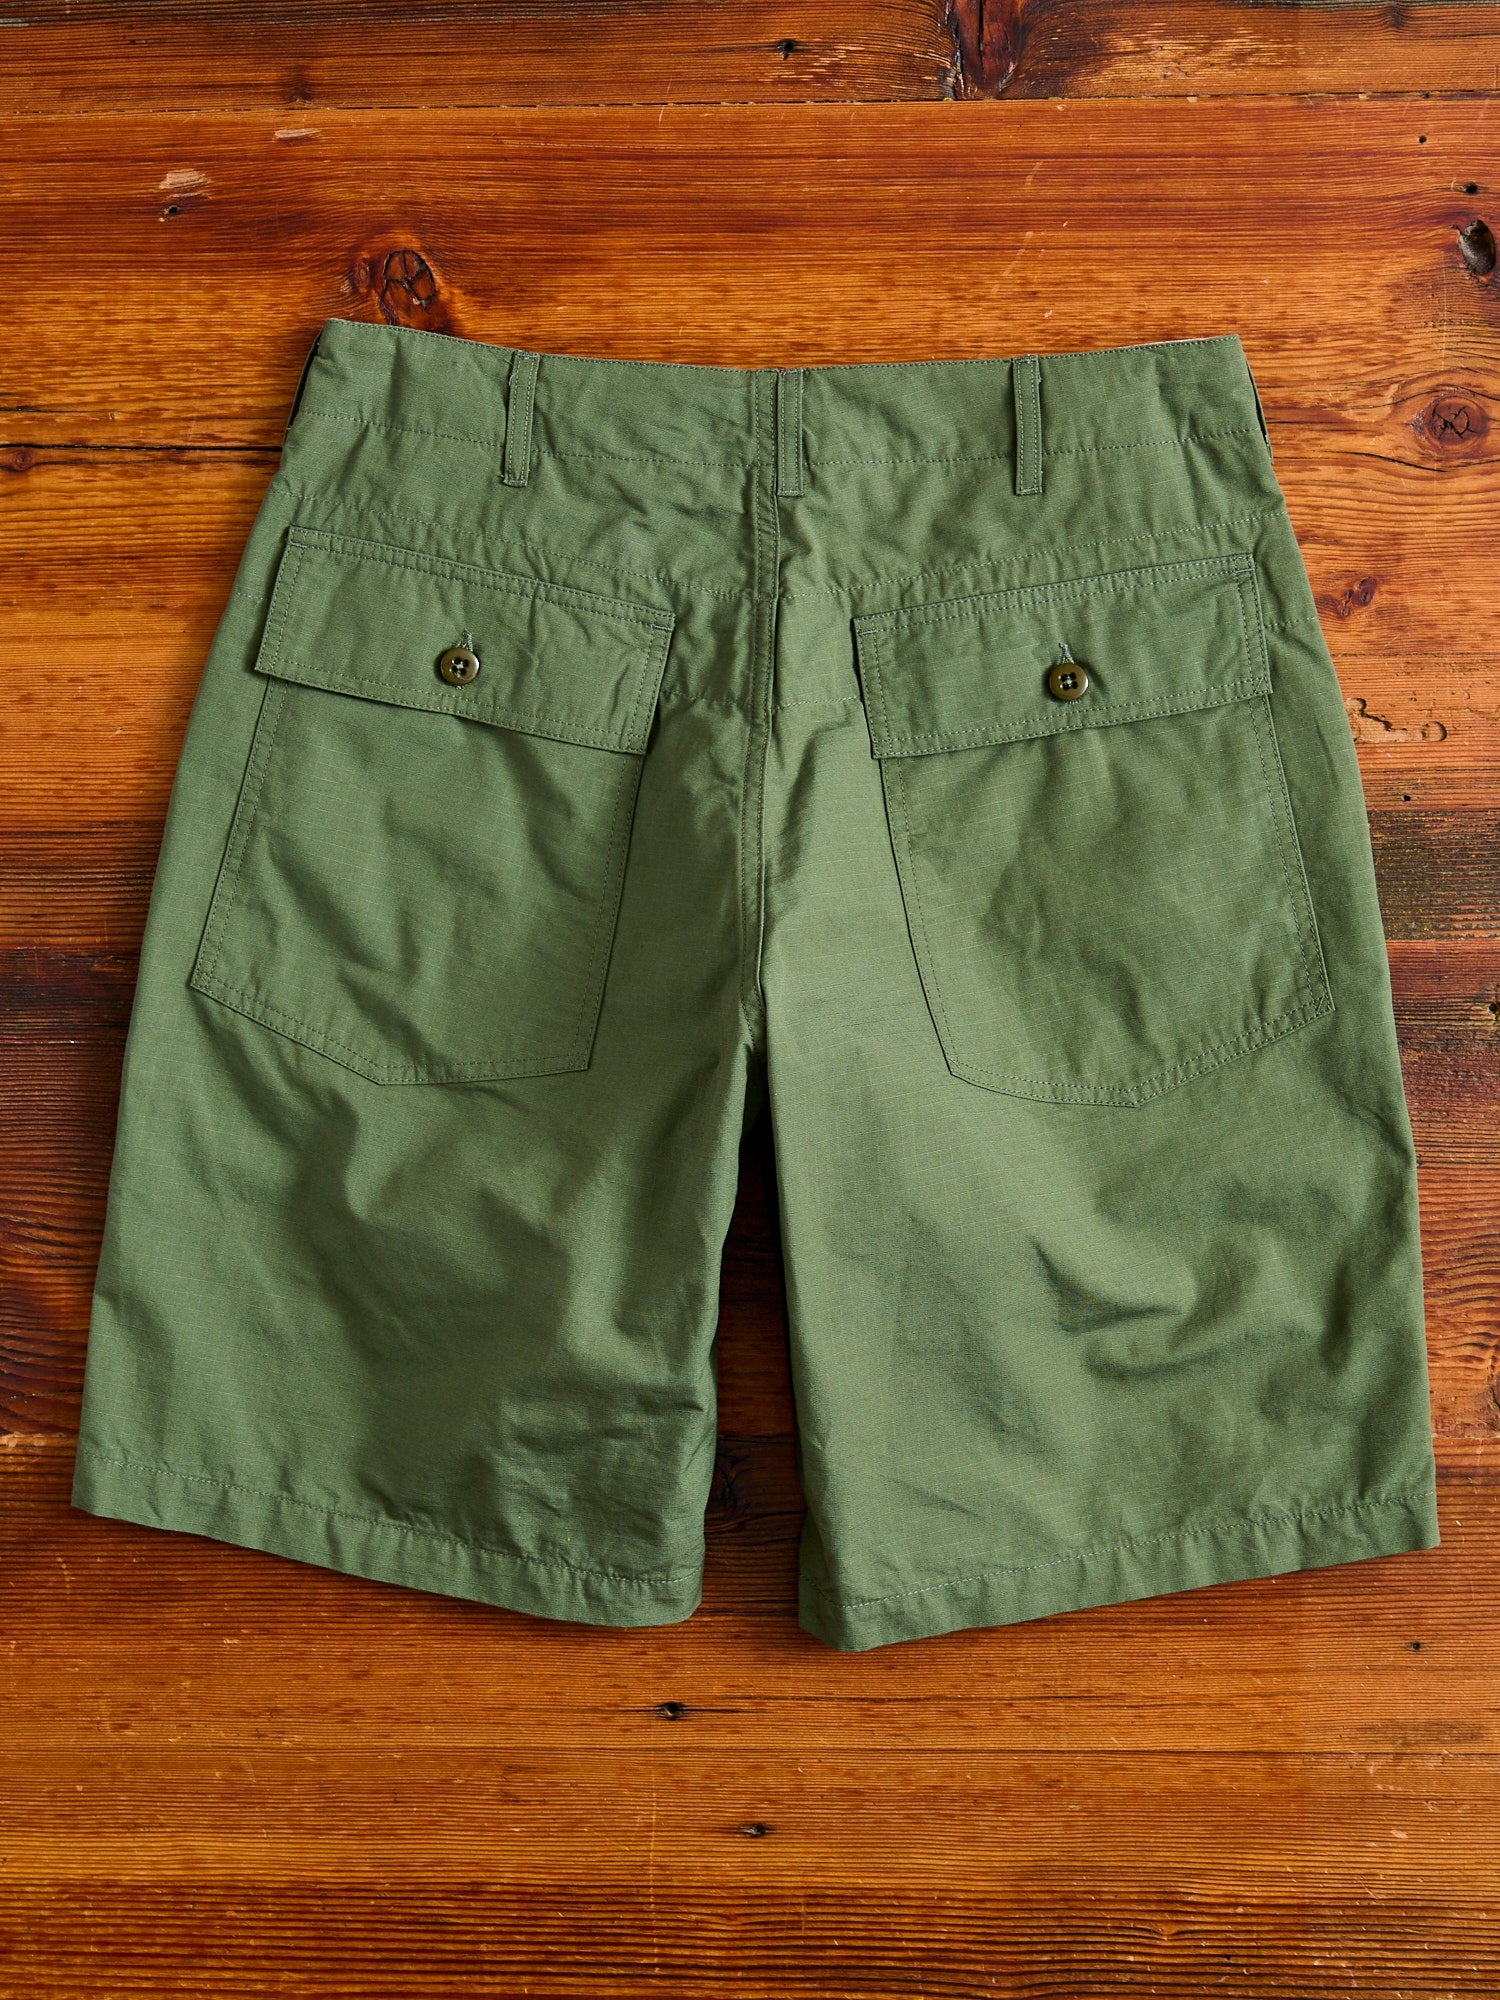 Fatigue Shorts in Olive Cotton Ripstop - 9